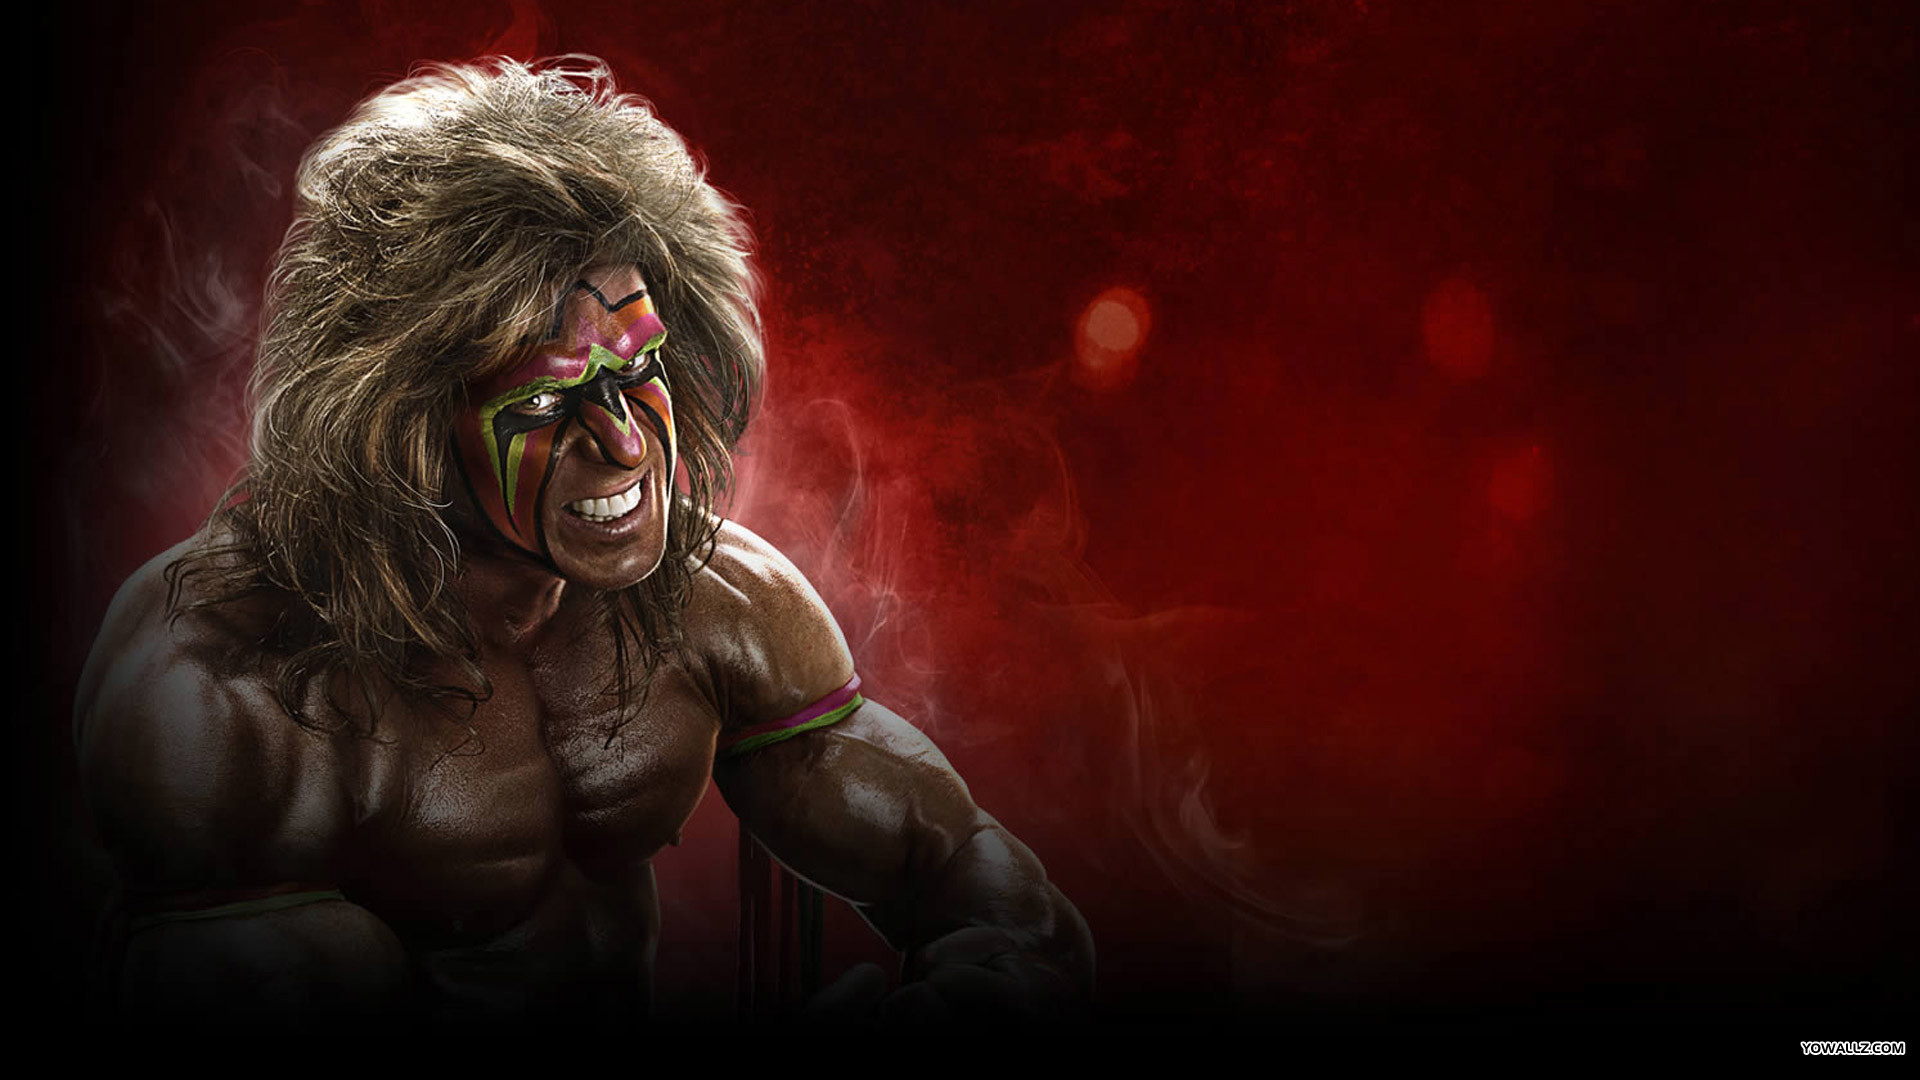 1920x1080 The Ultimate Warrior WWE 2K14 Exclusive HD Wallpapers